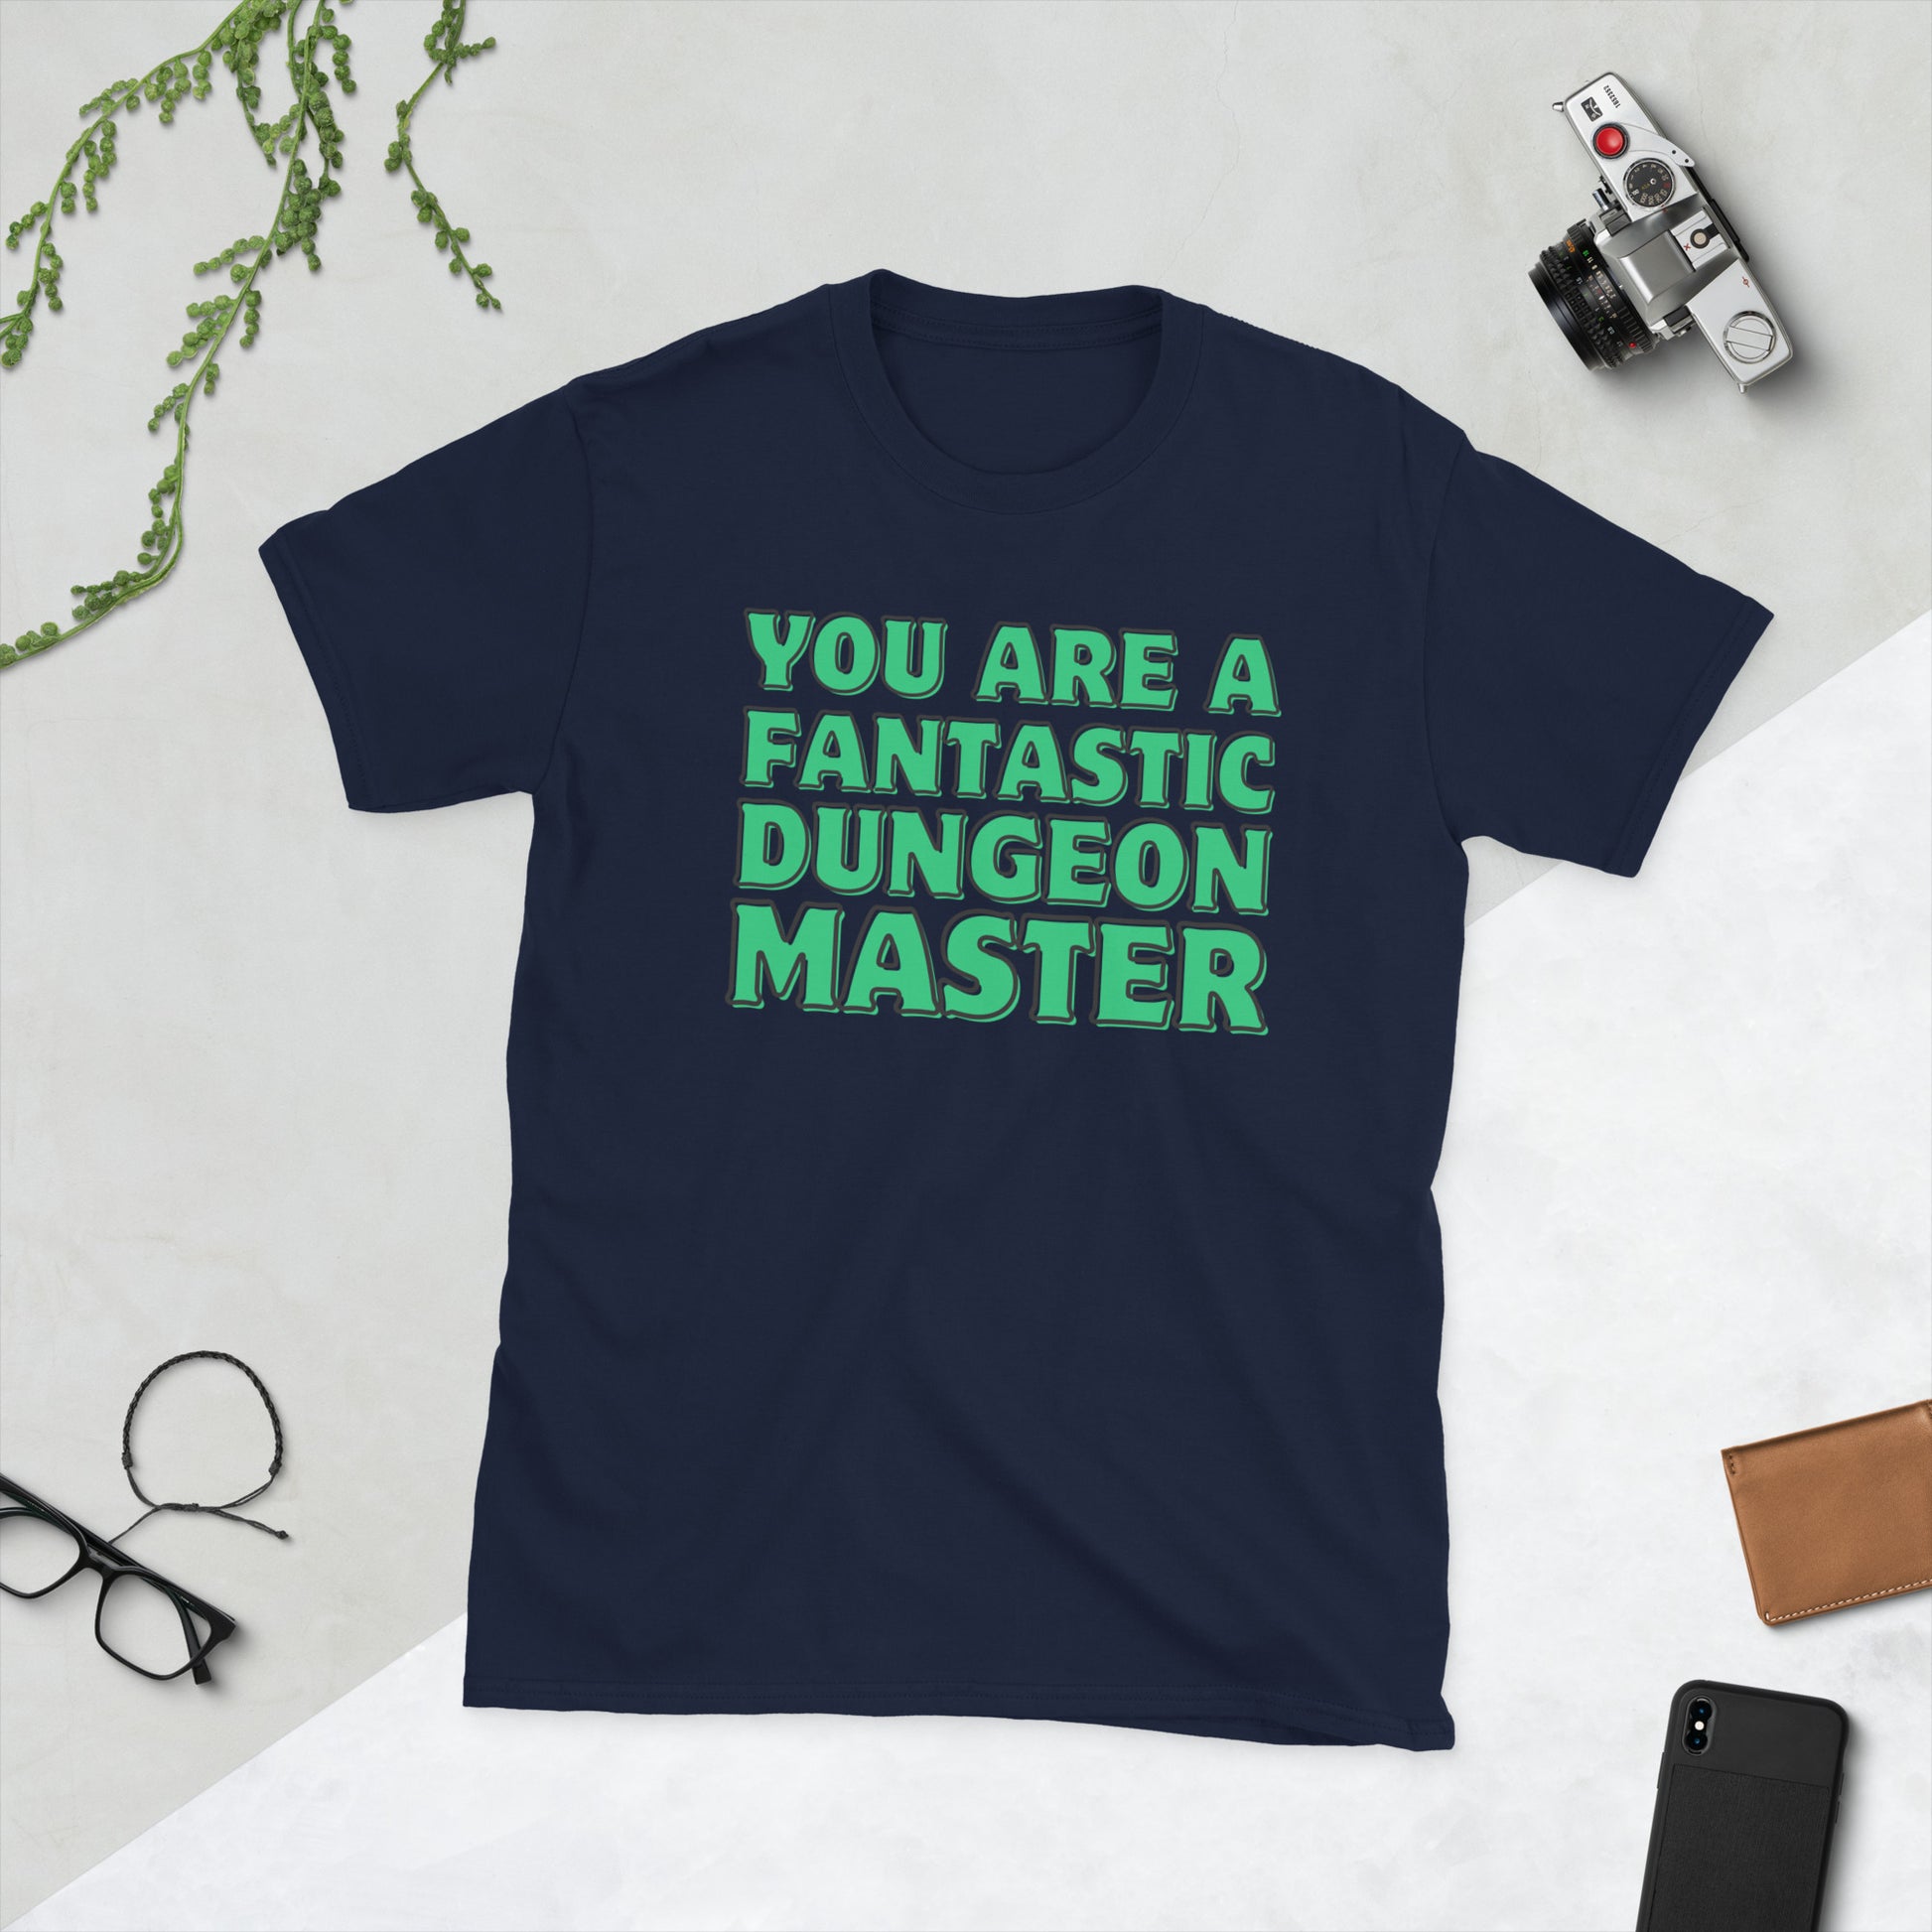 You are a fantastic dungeon master Short-Sleeve Unisex T-Shirt  Level 1 Gamers Navy S 